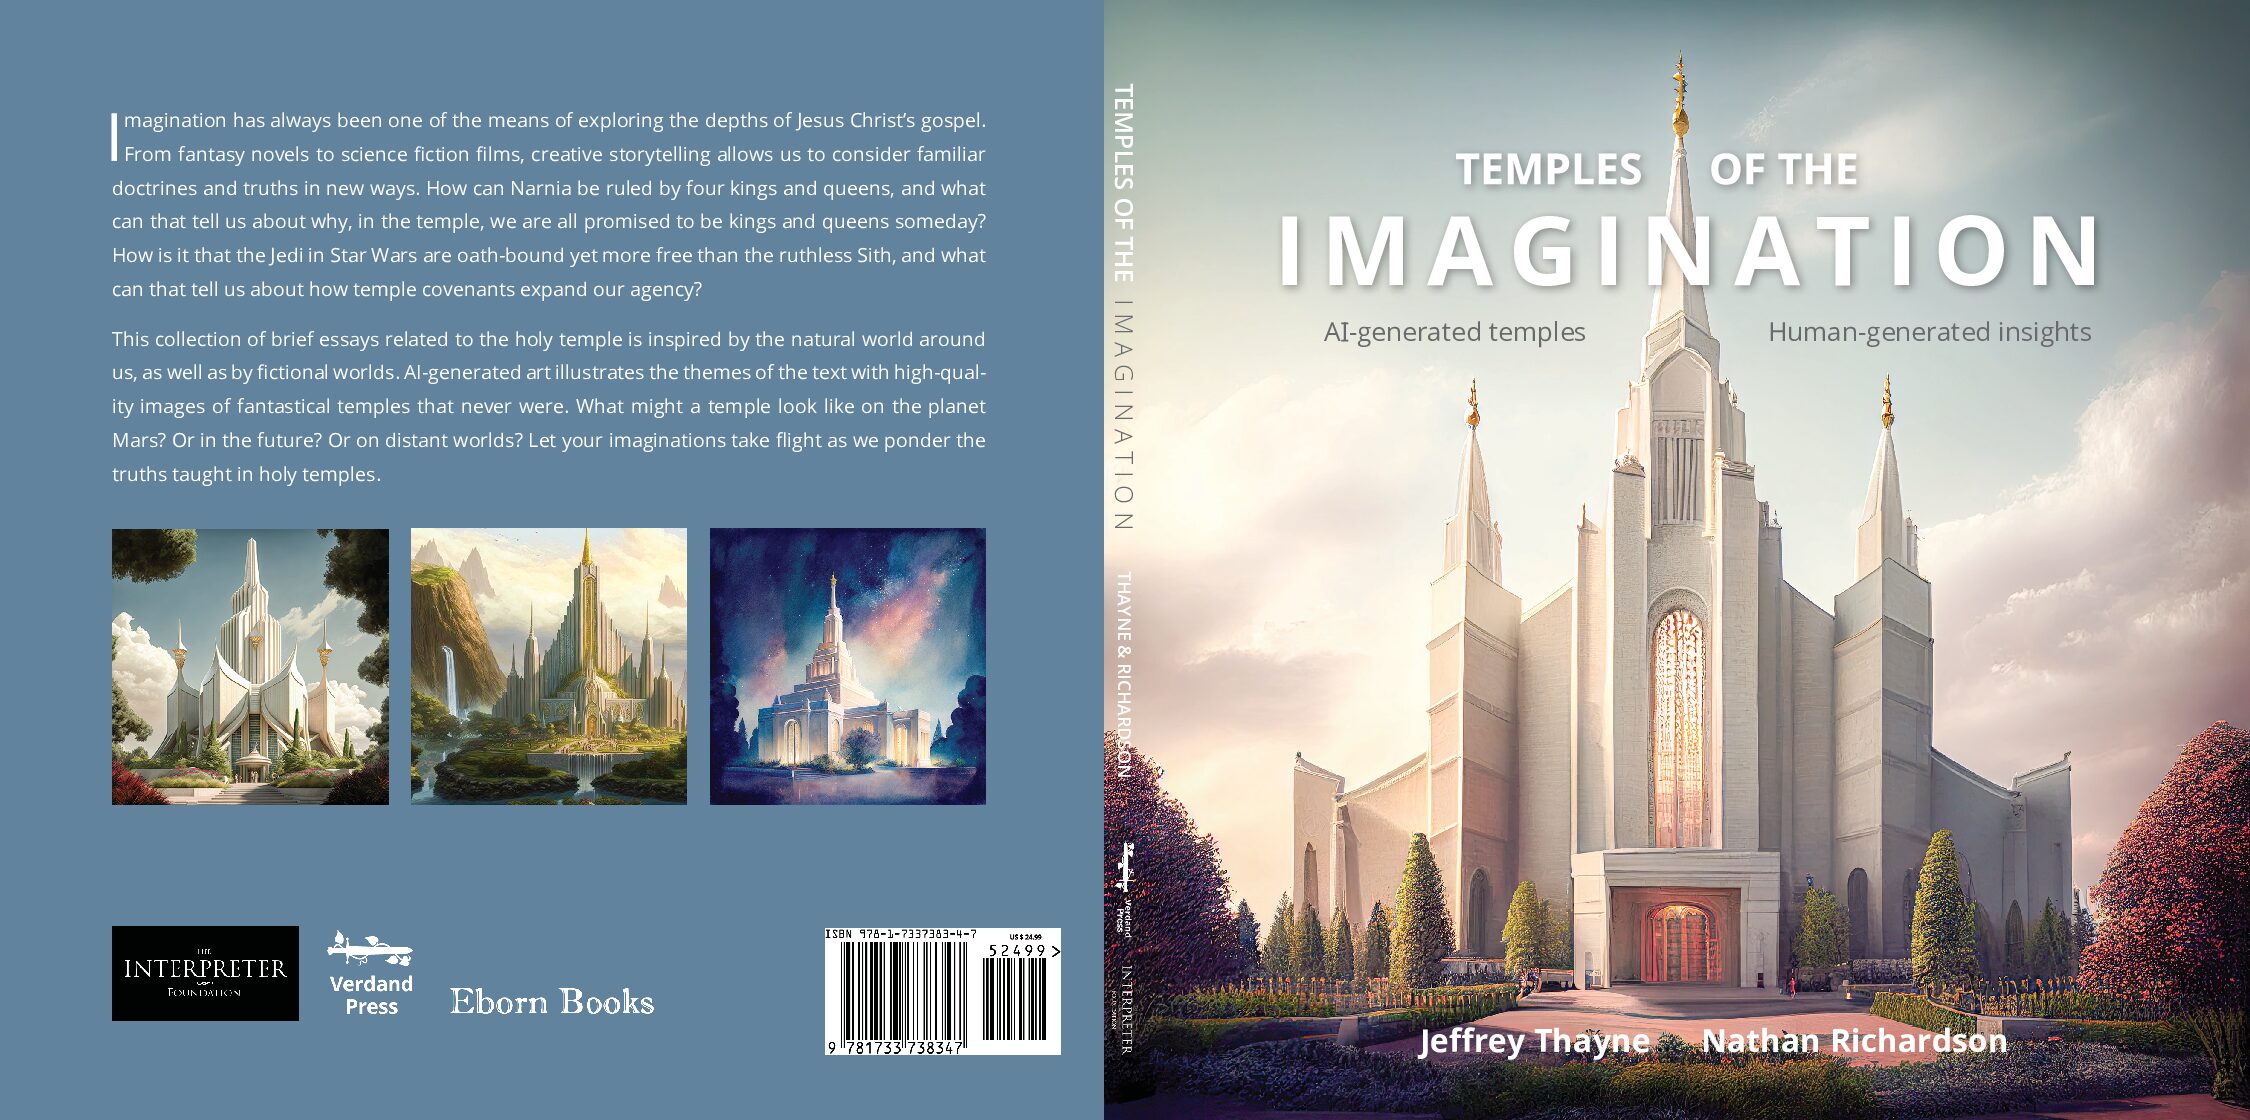 NEW — Temples of the Imagination — AI-Generated Temples, Human-Generated Insights — Jeffrey Thayne & Nathan Richardson — Amazingly Unique/The First of It’s Kind in LDS Literature!